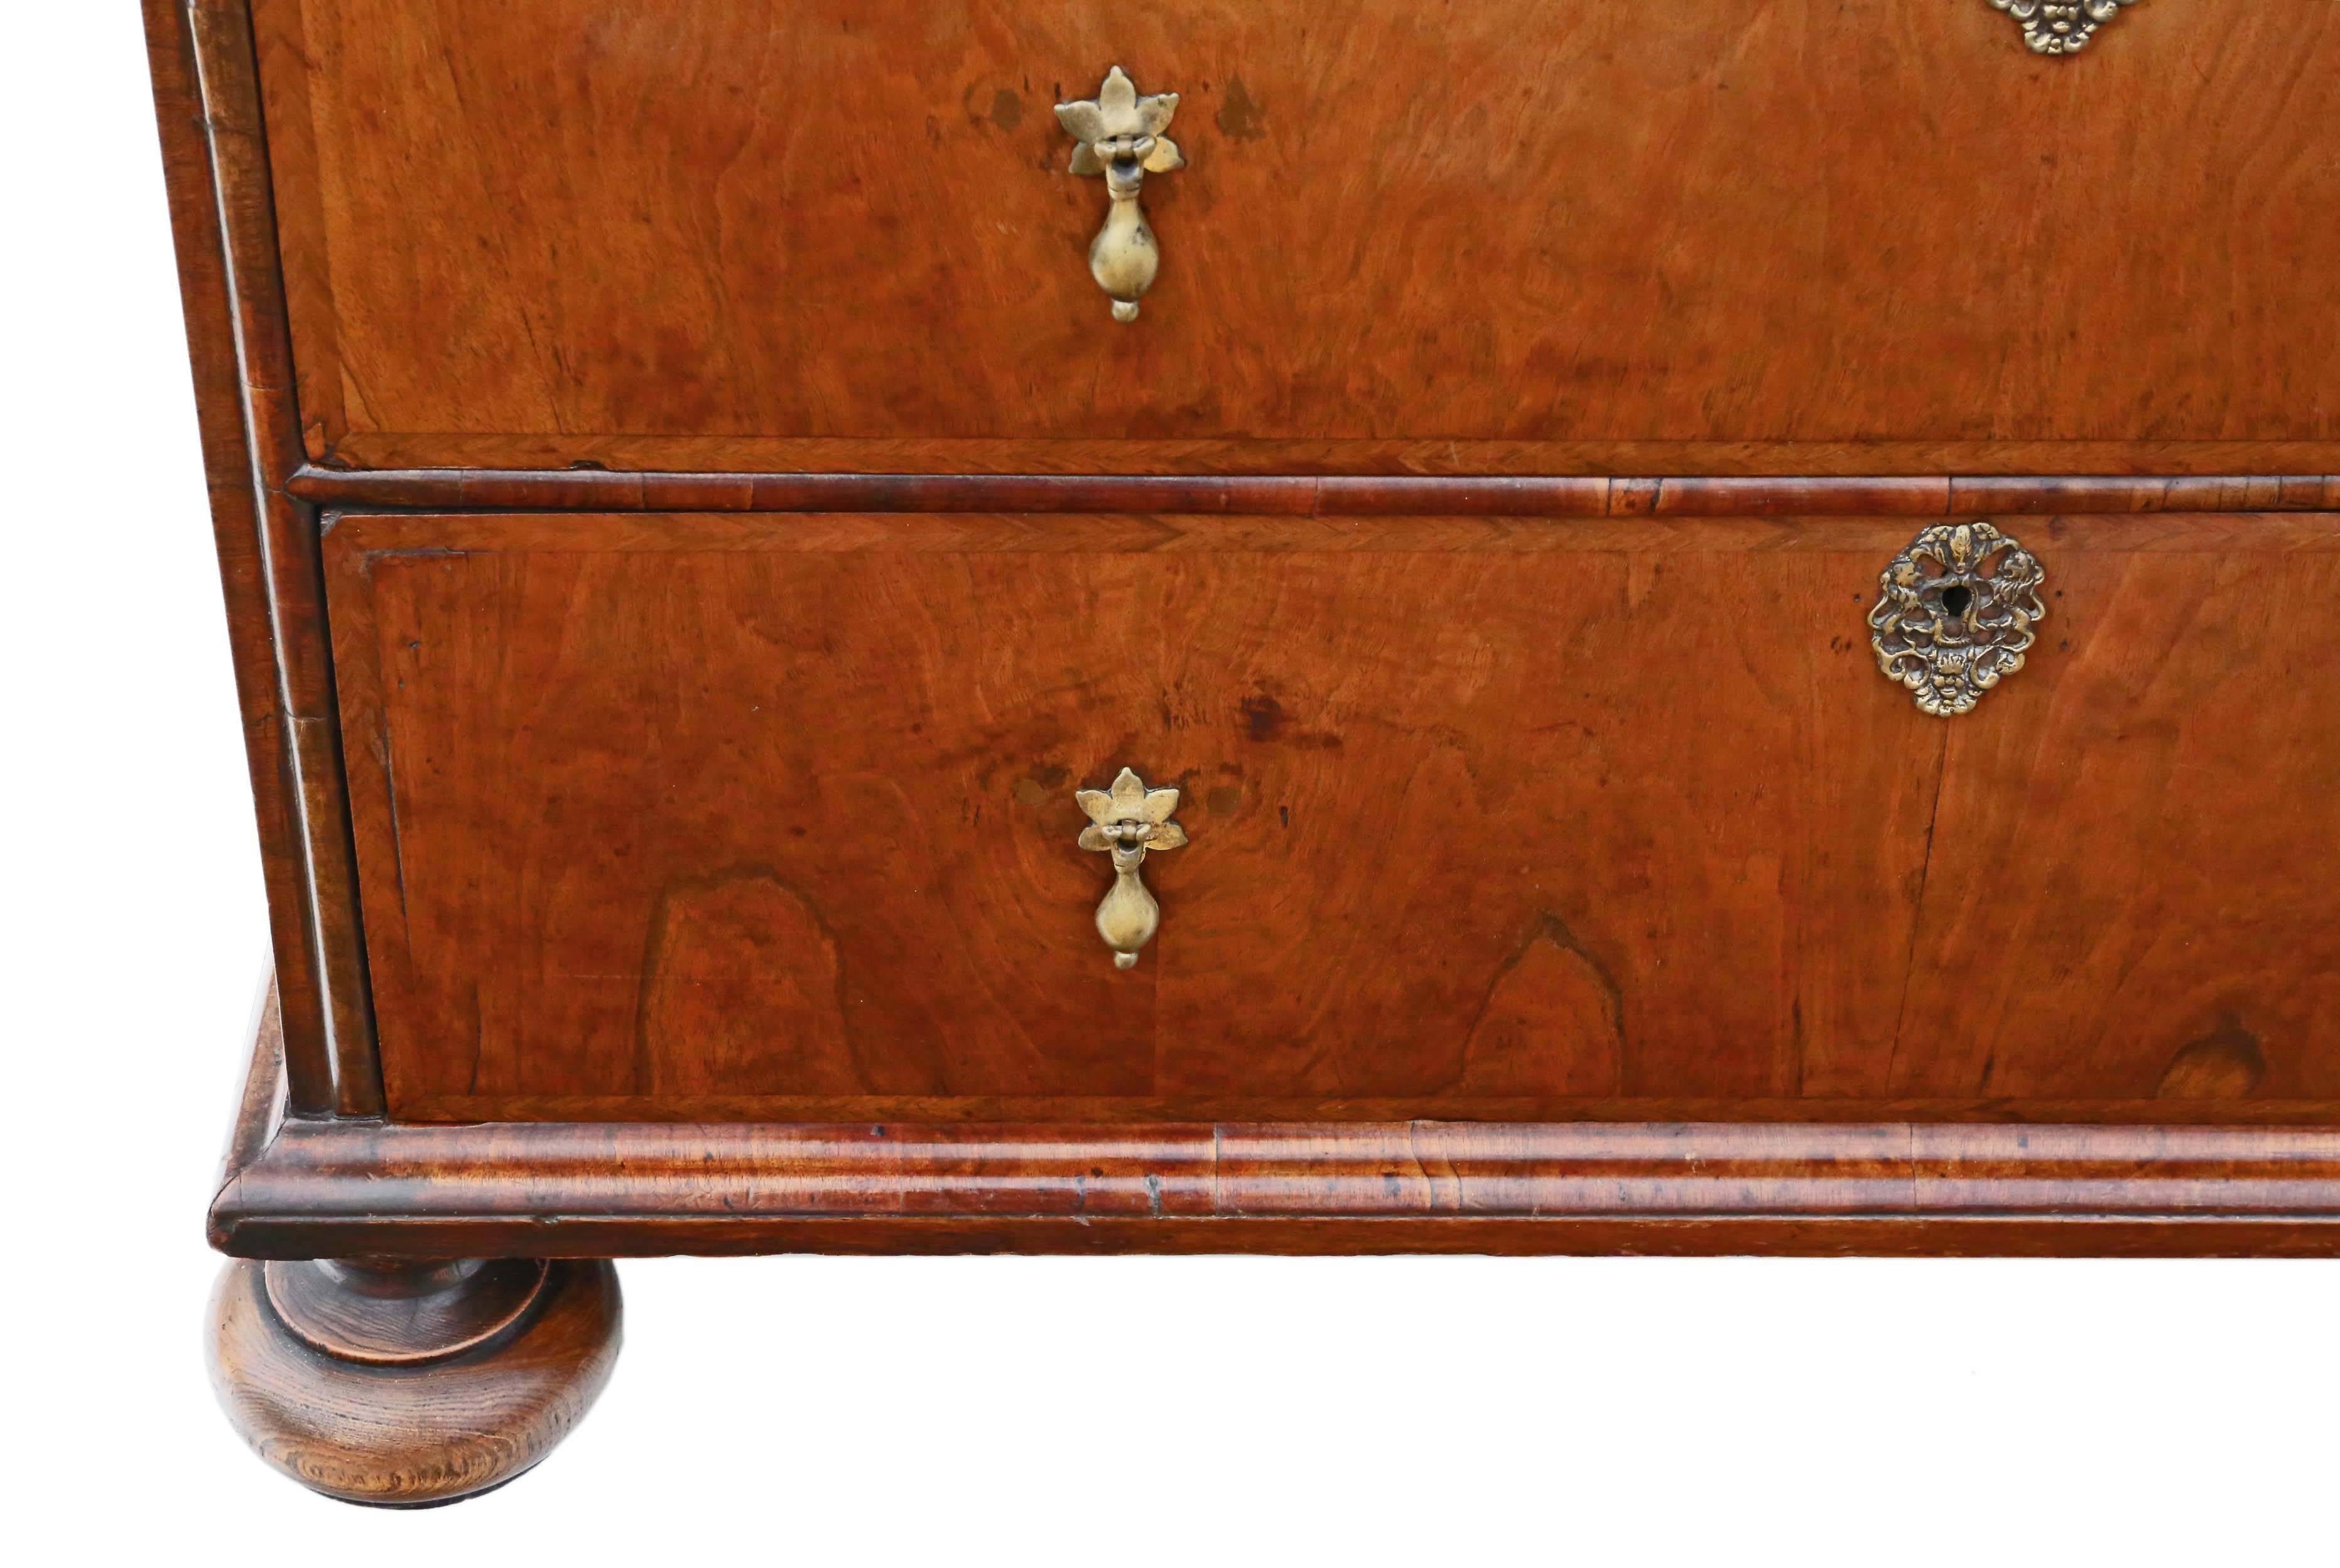 British Antique Quality William & Mary circa 1690-1700 Walnut Chest Of Drawers For Sale